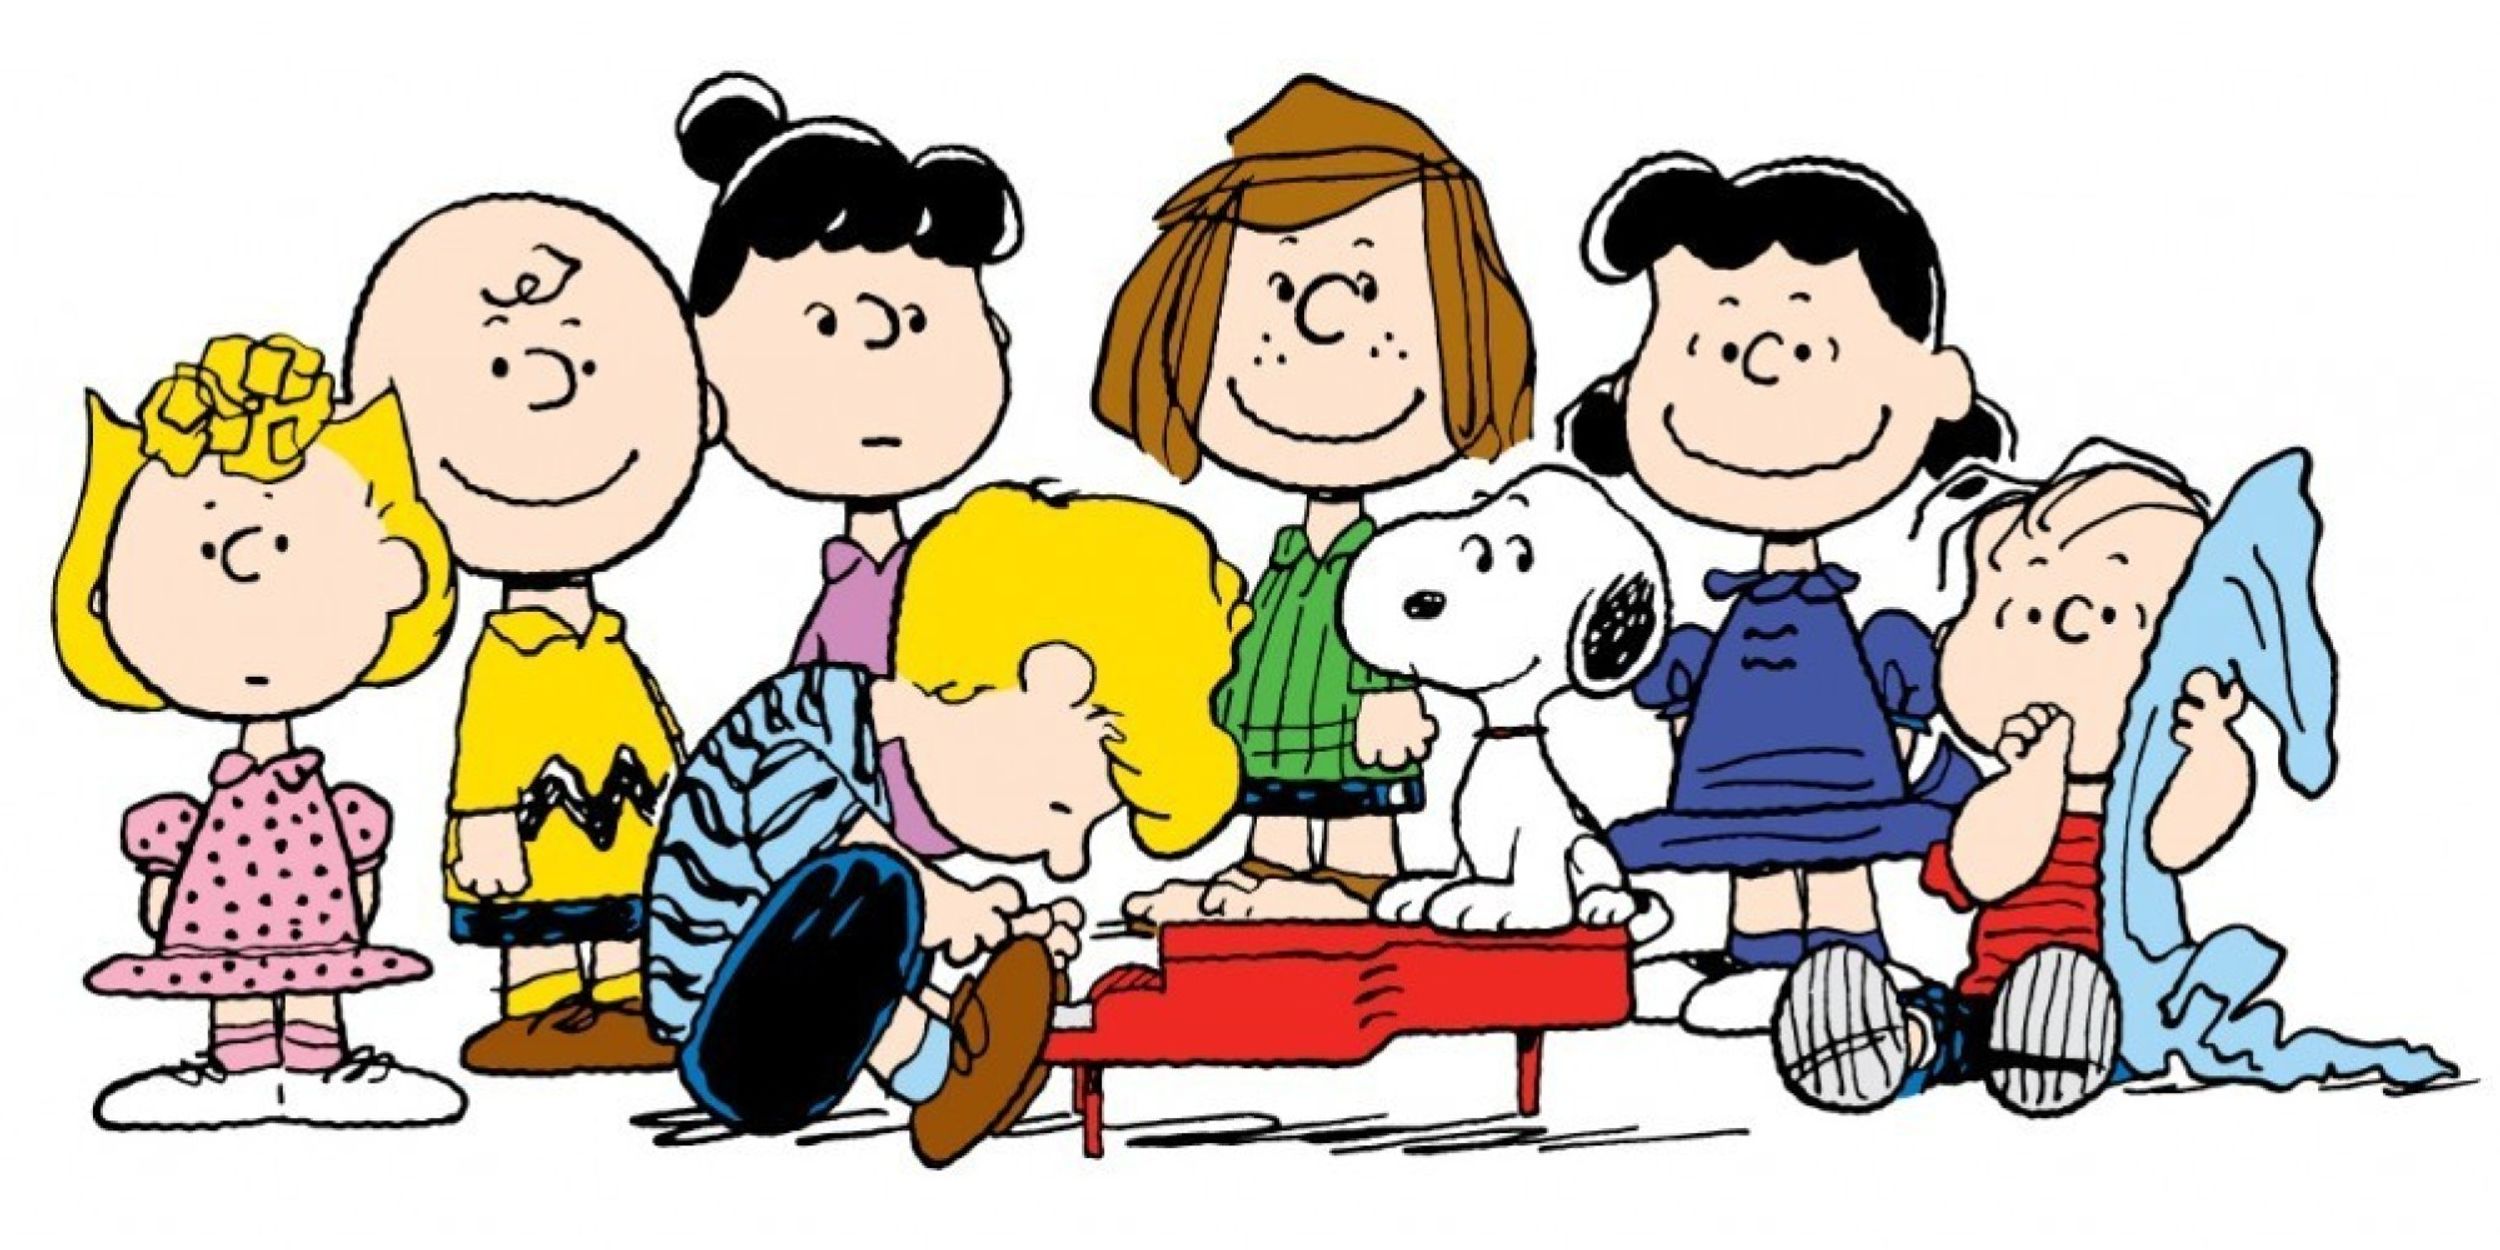 10 Lessons The Peanuts Comic Strip Taught Us